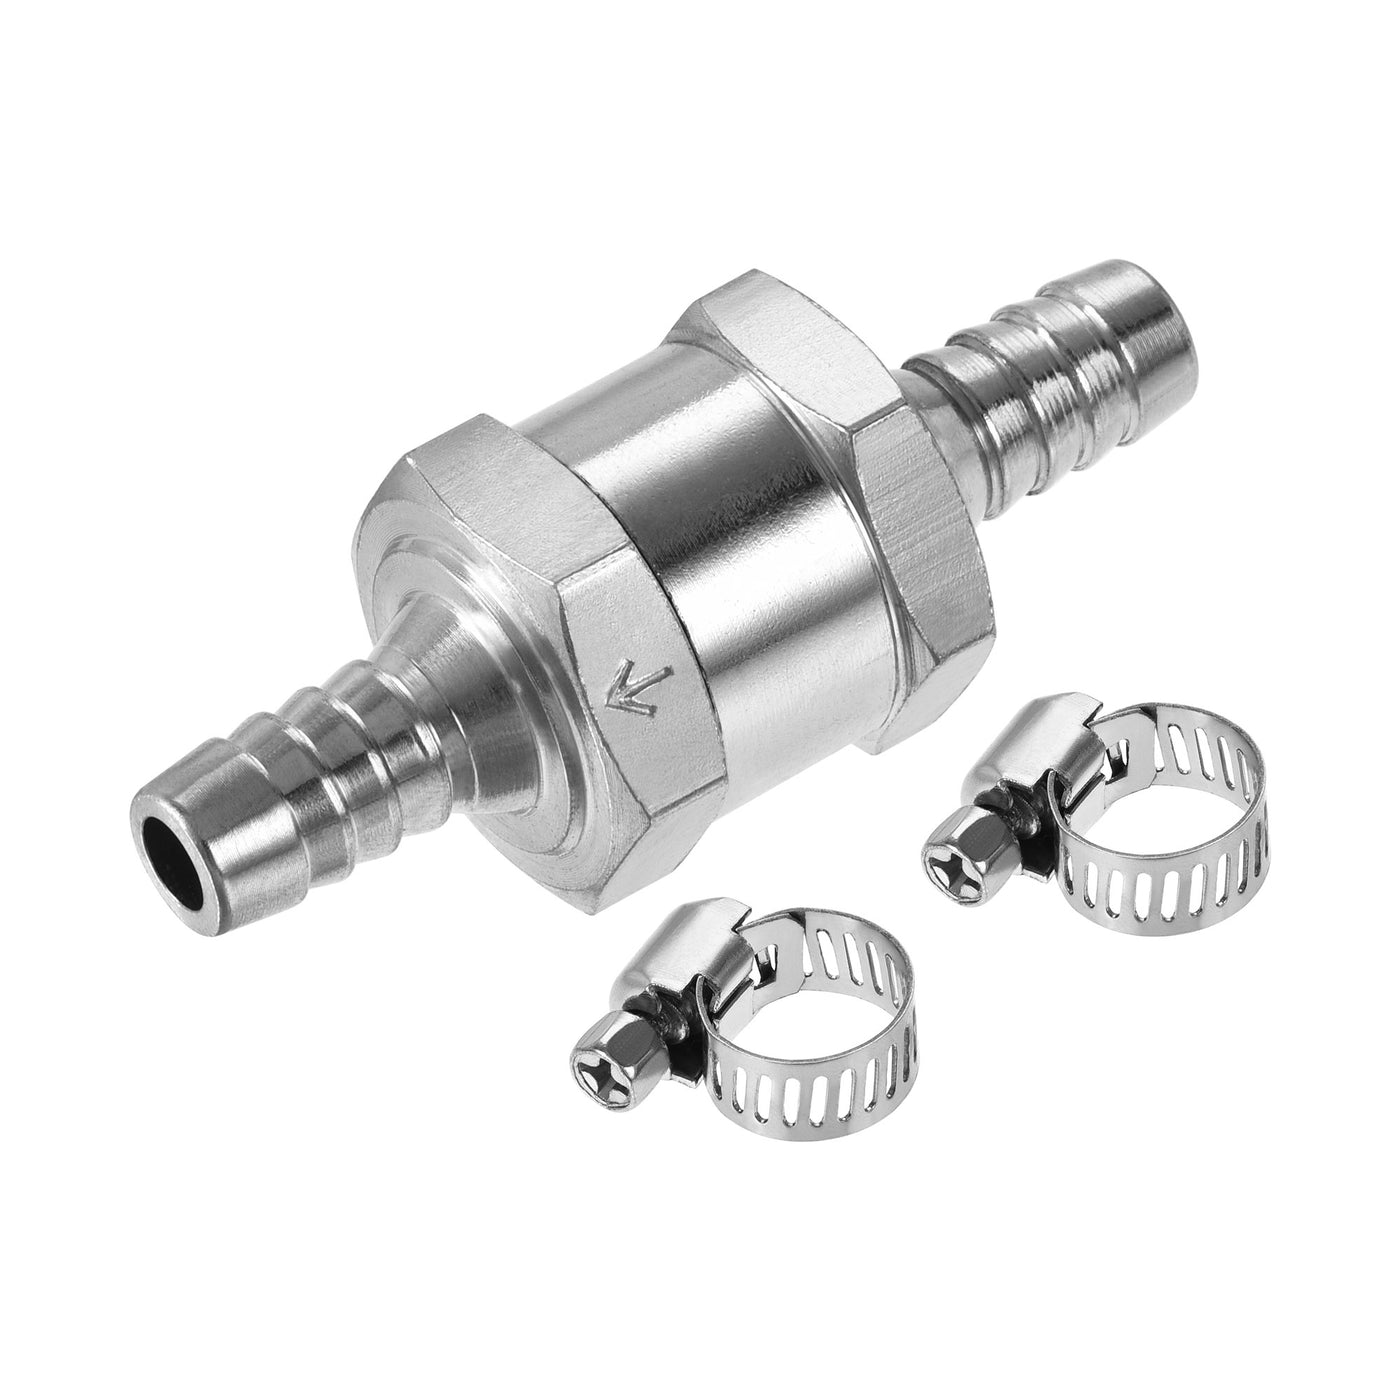 uxcell Uxcell Non-Return One Way Check Valve with Hose Clamps, 9mm Barb OD, for Water Petrol Fuel Line